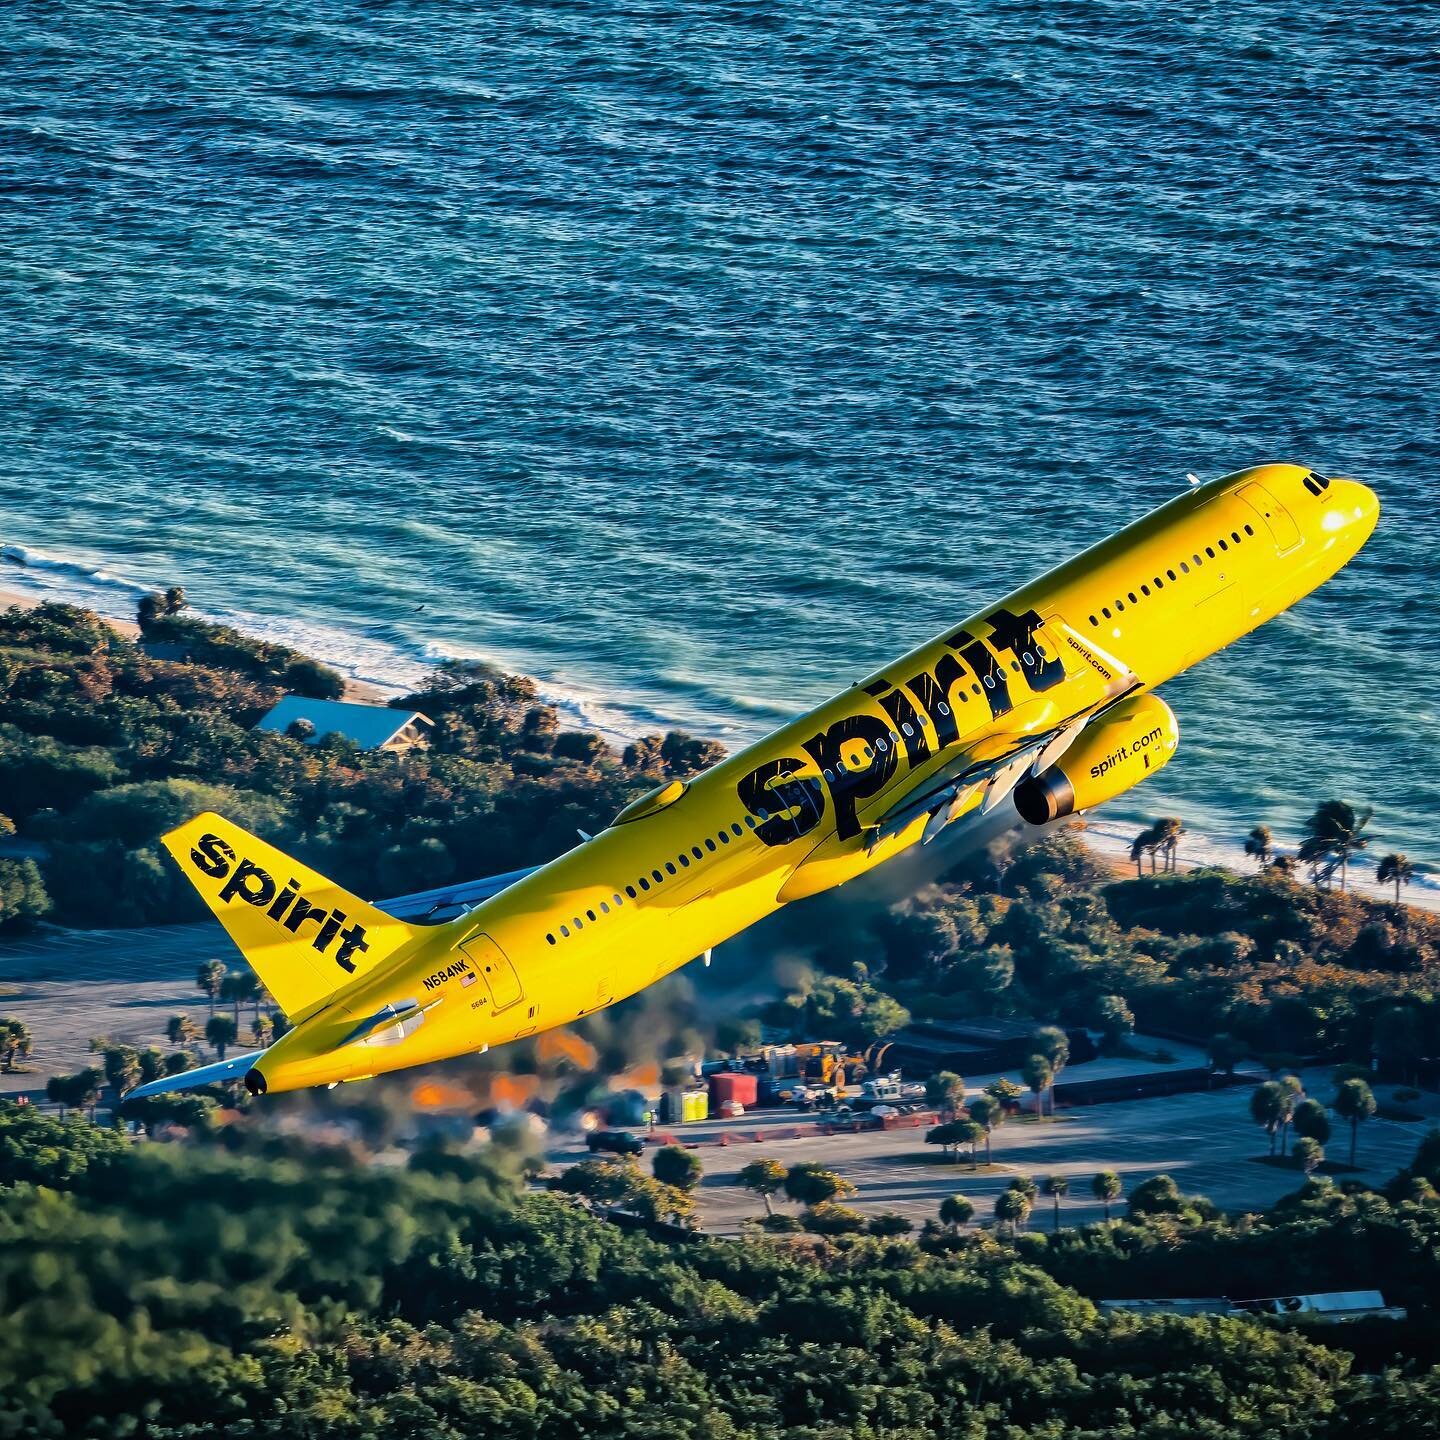 Home of the bare fare and flying bananas! #spiritairlines #a321 #airbus #airbuslover  #fortlauderdale #fllairport #fortlauderdalebeach #a2a #aerialphotography #aviation #instagramaviation #avgeek #aviationphotography #nikon #d850 #aviationlovers #nat